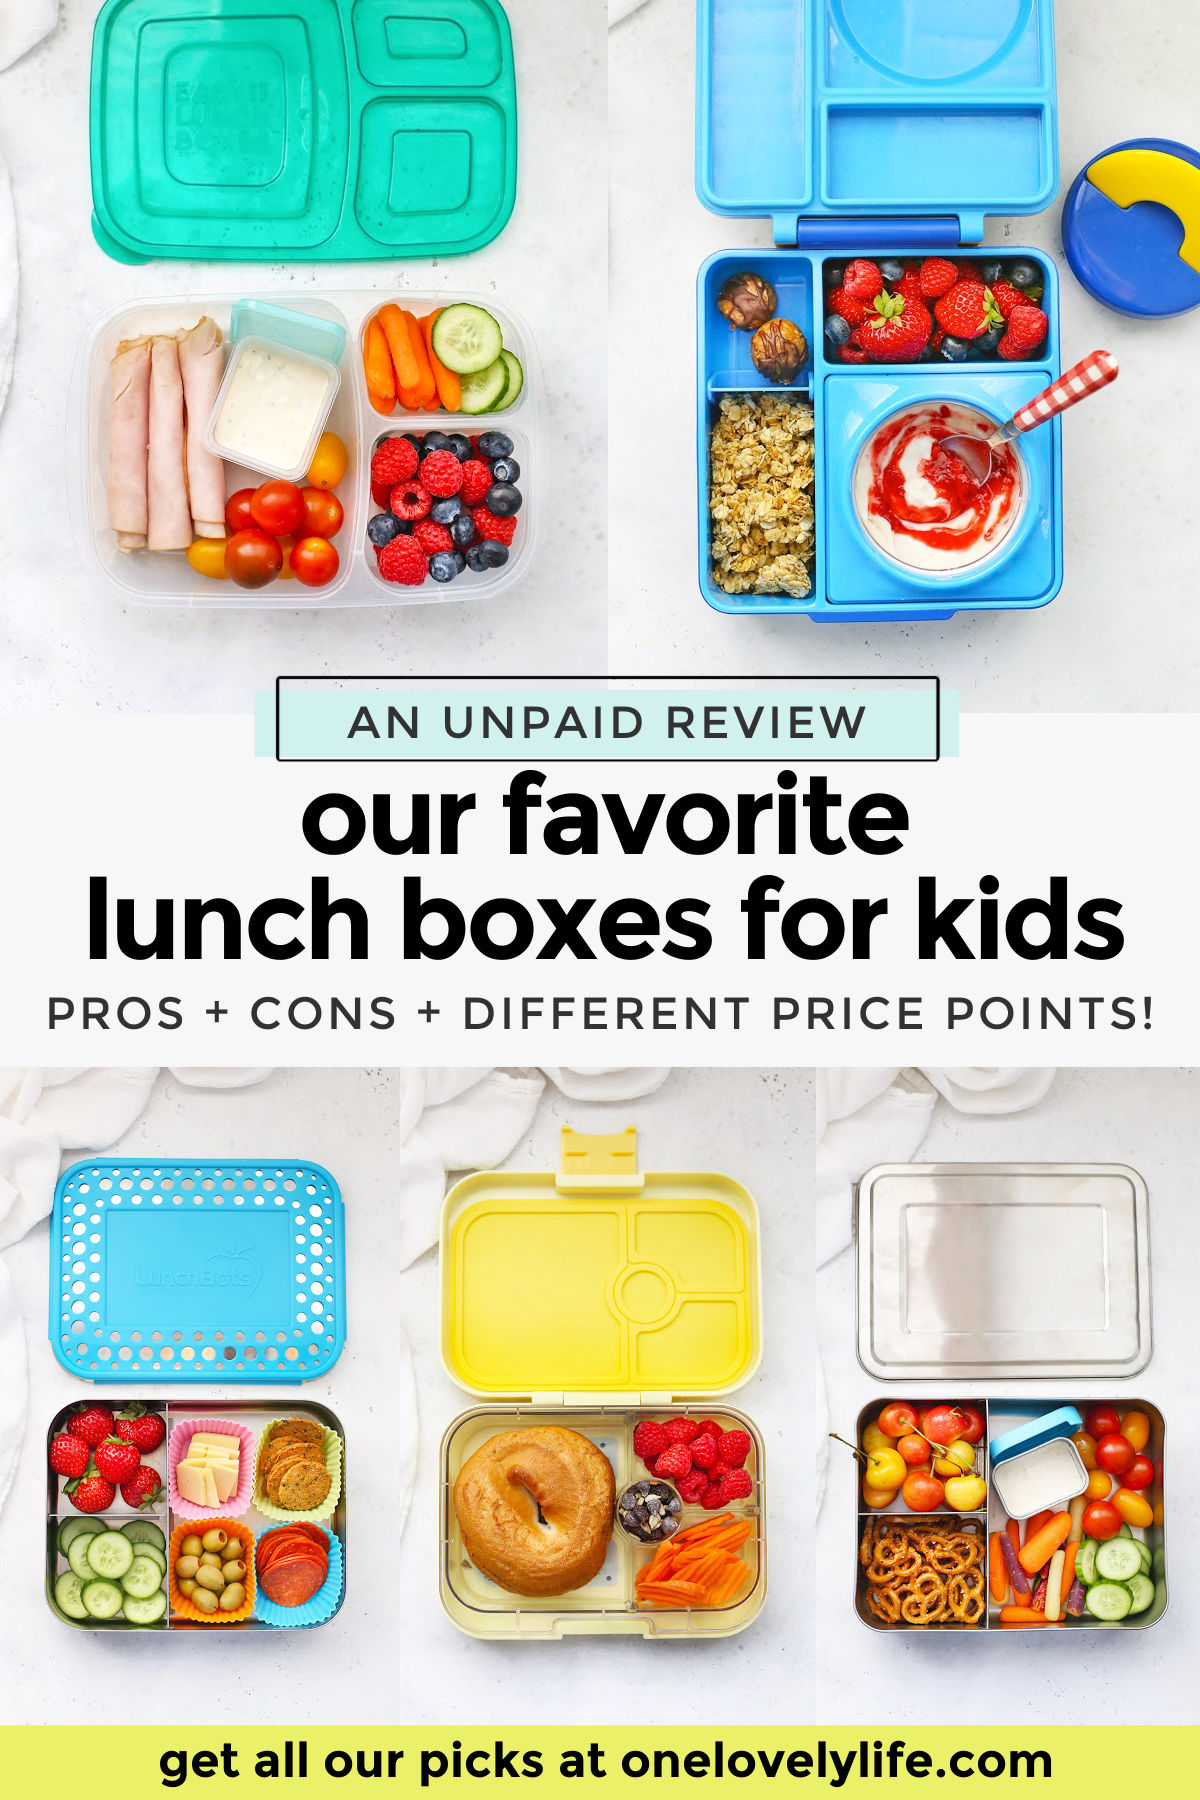 The BEST School Lunch Boxes and Reusable Bags for packing school lunches! Find out the pros and cons of each one. // school lunches // packed lunches // kids lunch box review // lunch boxes // the best kids' lunch boxes // reusable bags // omie box lunch boxes // easy lunchboxes // packed lunches // stashers bags // rezip bags // russbe bags // eco friendly // less waste // healthy kids